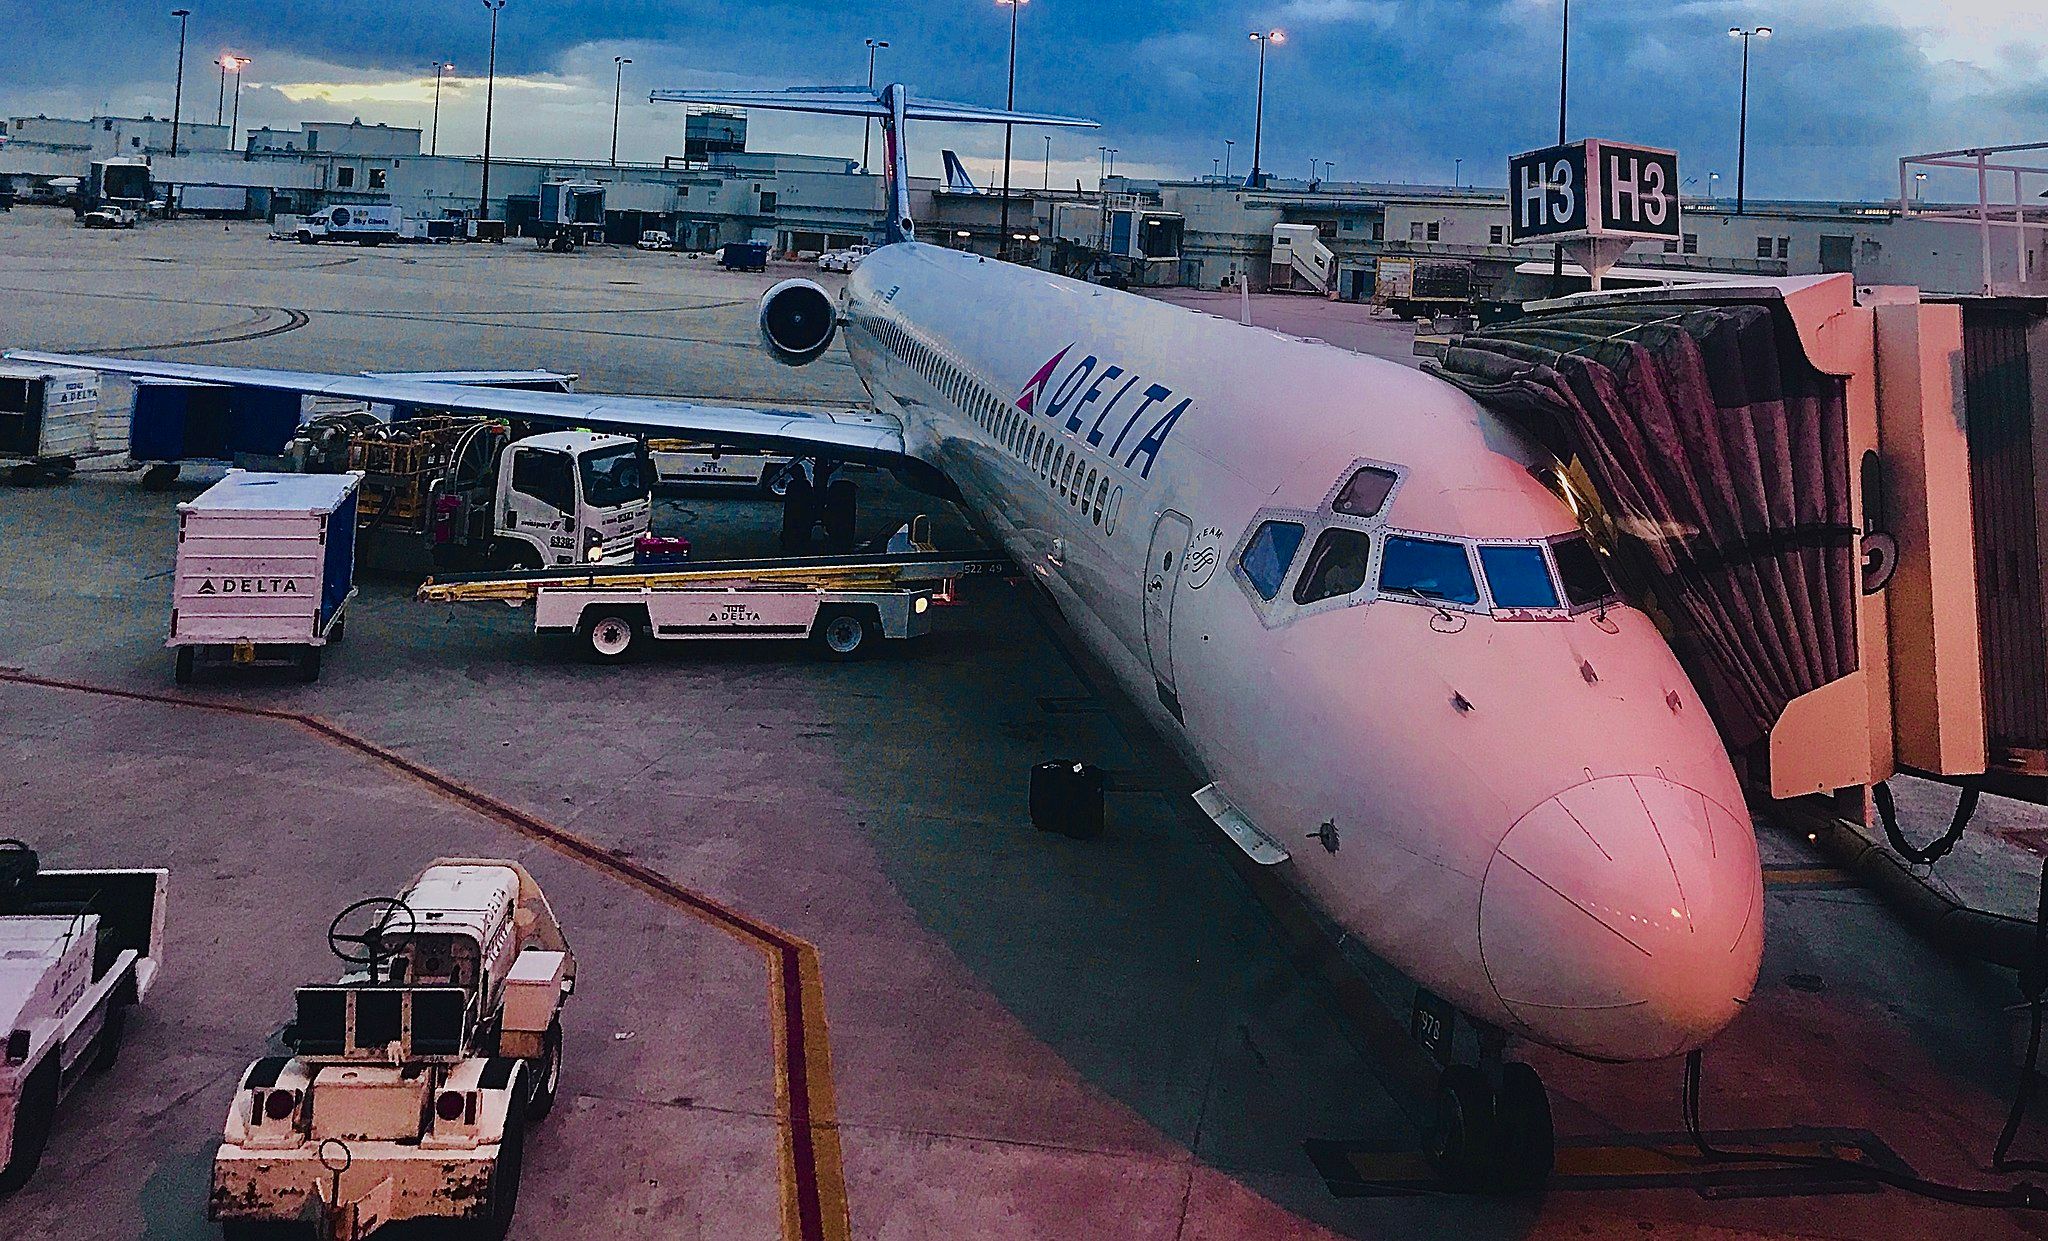 A white Delta Airlines jetliner parked at the gate connected to jet bridge